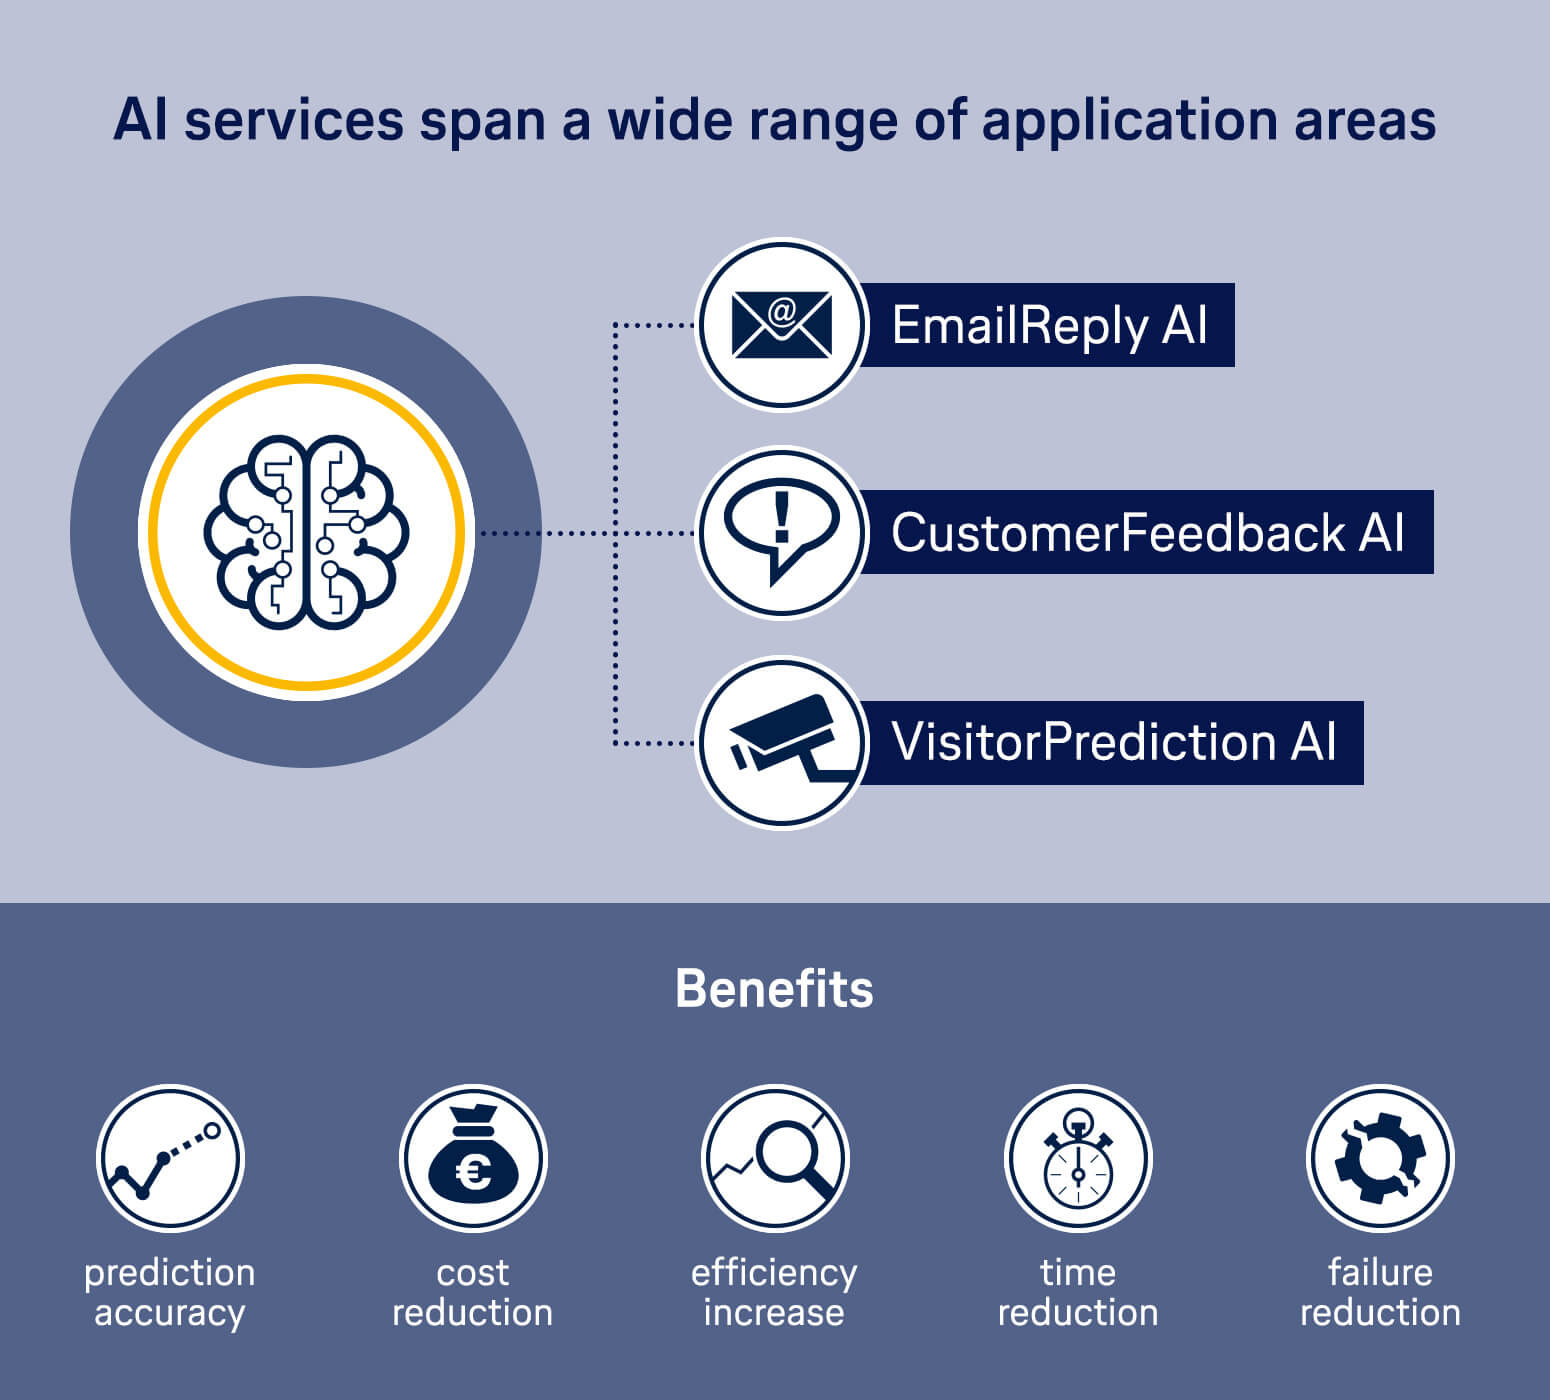 Lufthansa Industry Solutions' exploration into Artificial Intelligence as a Service (AIaaS)